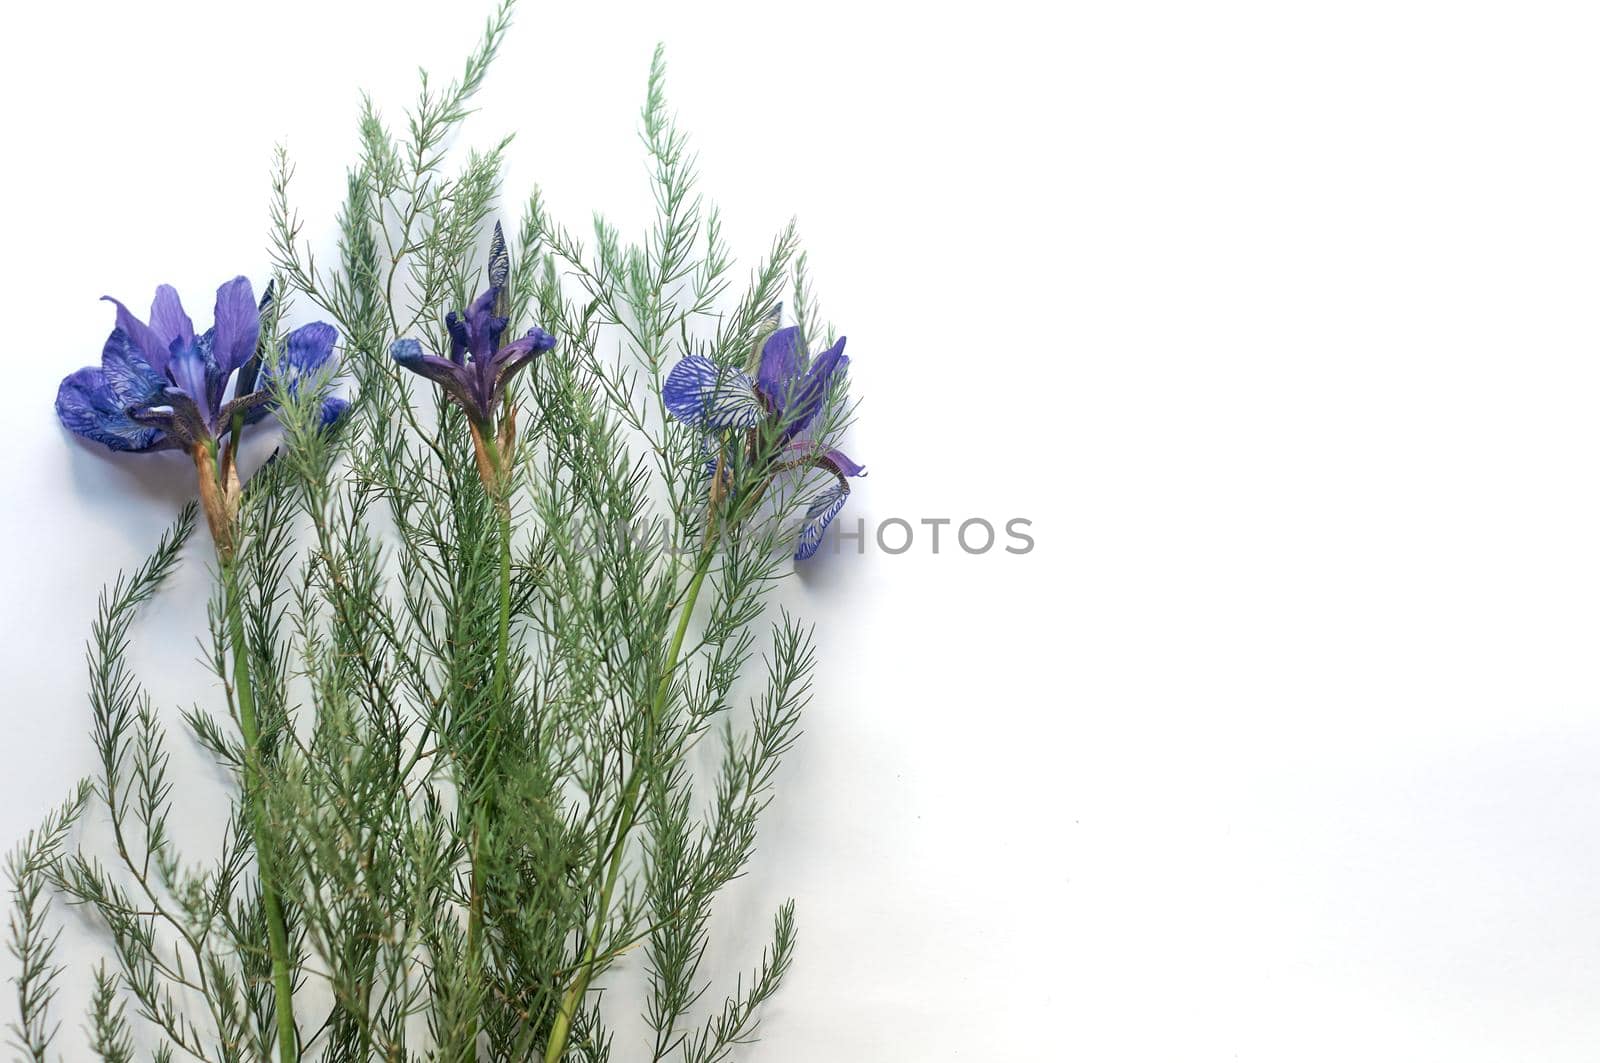 bouquet of wild purple iris flowers on a white paper background